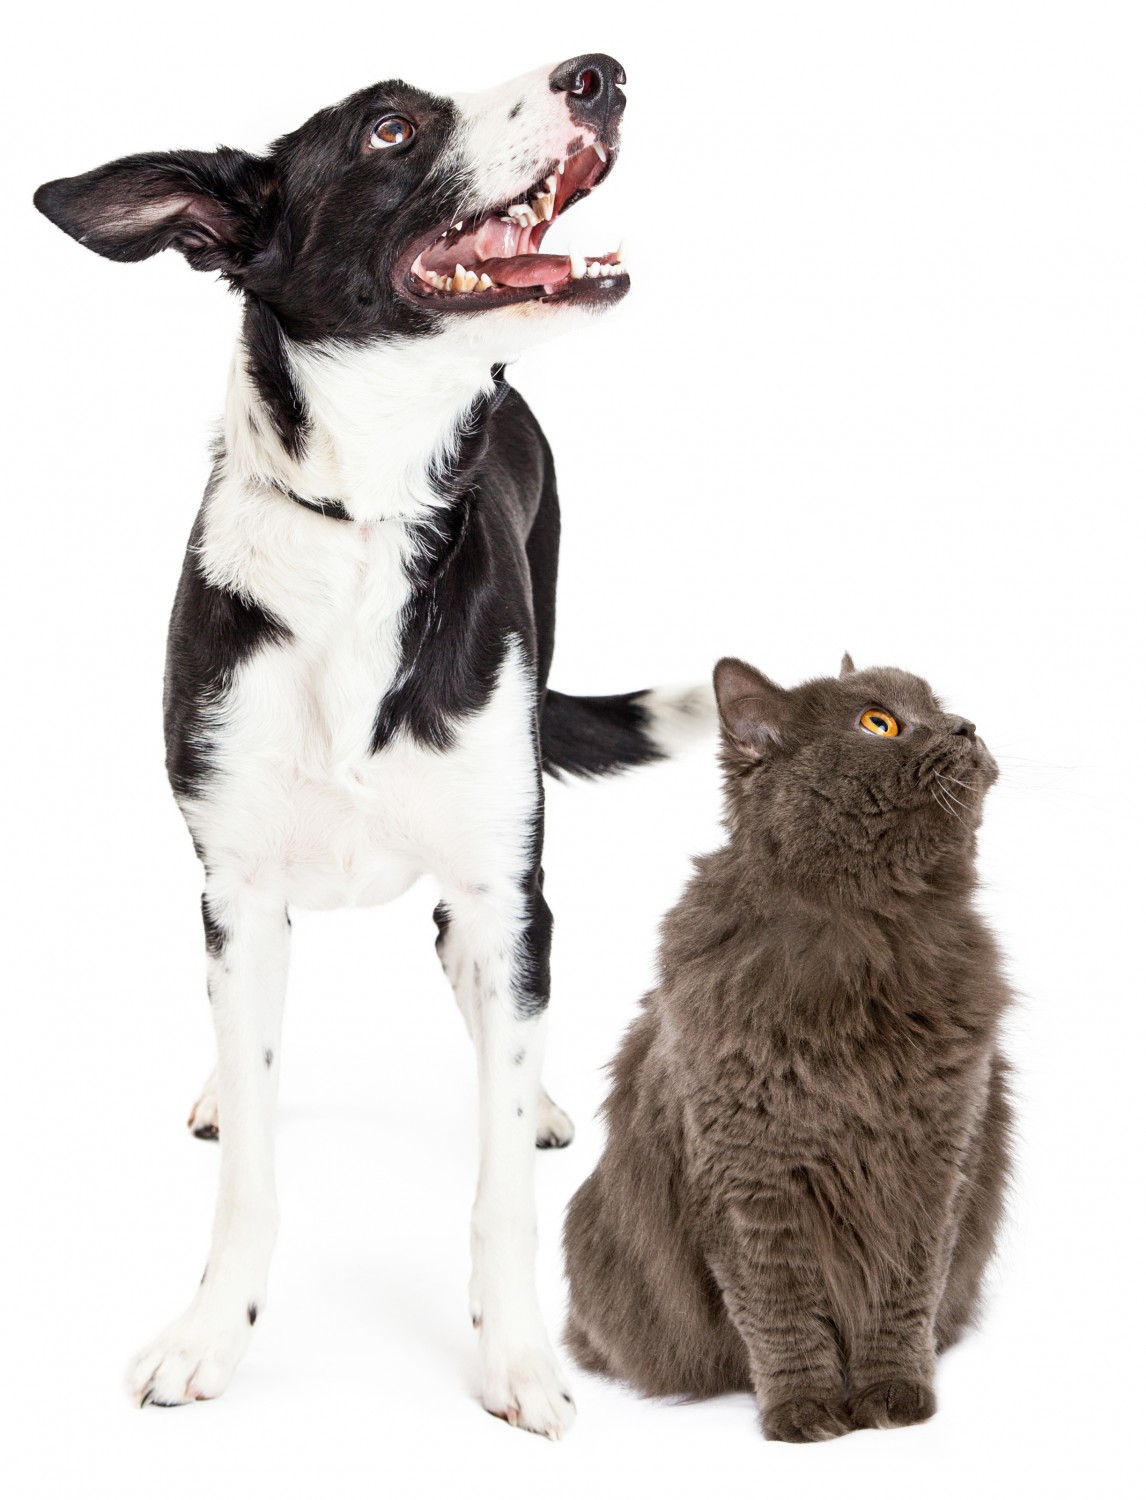 Dog and Cat on white background